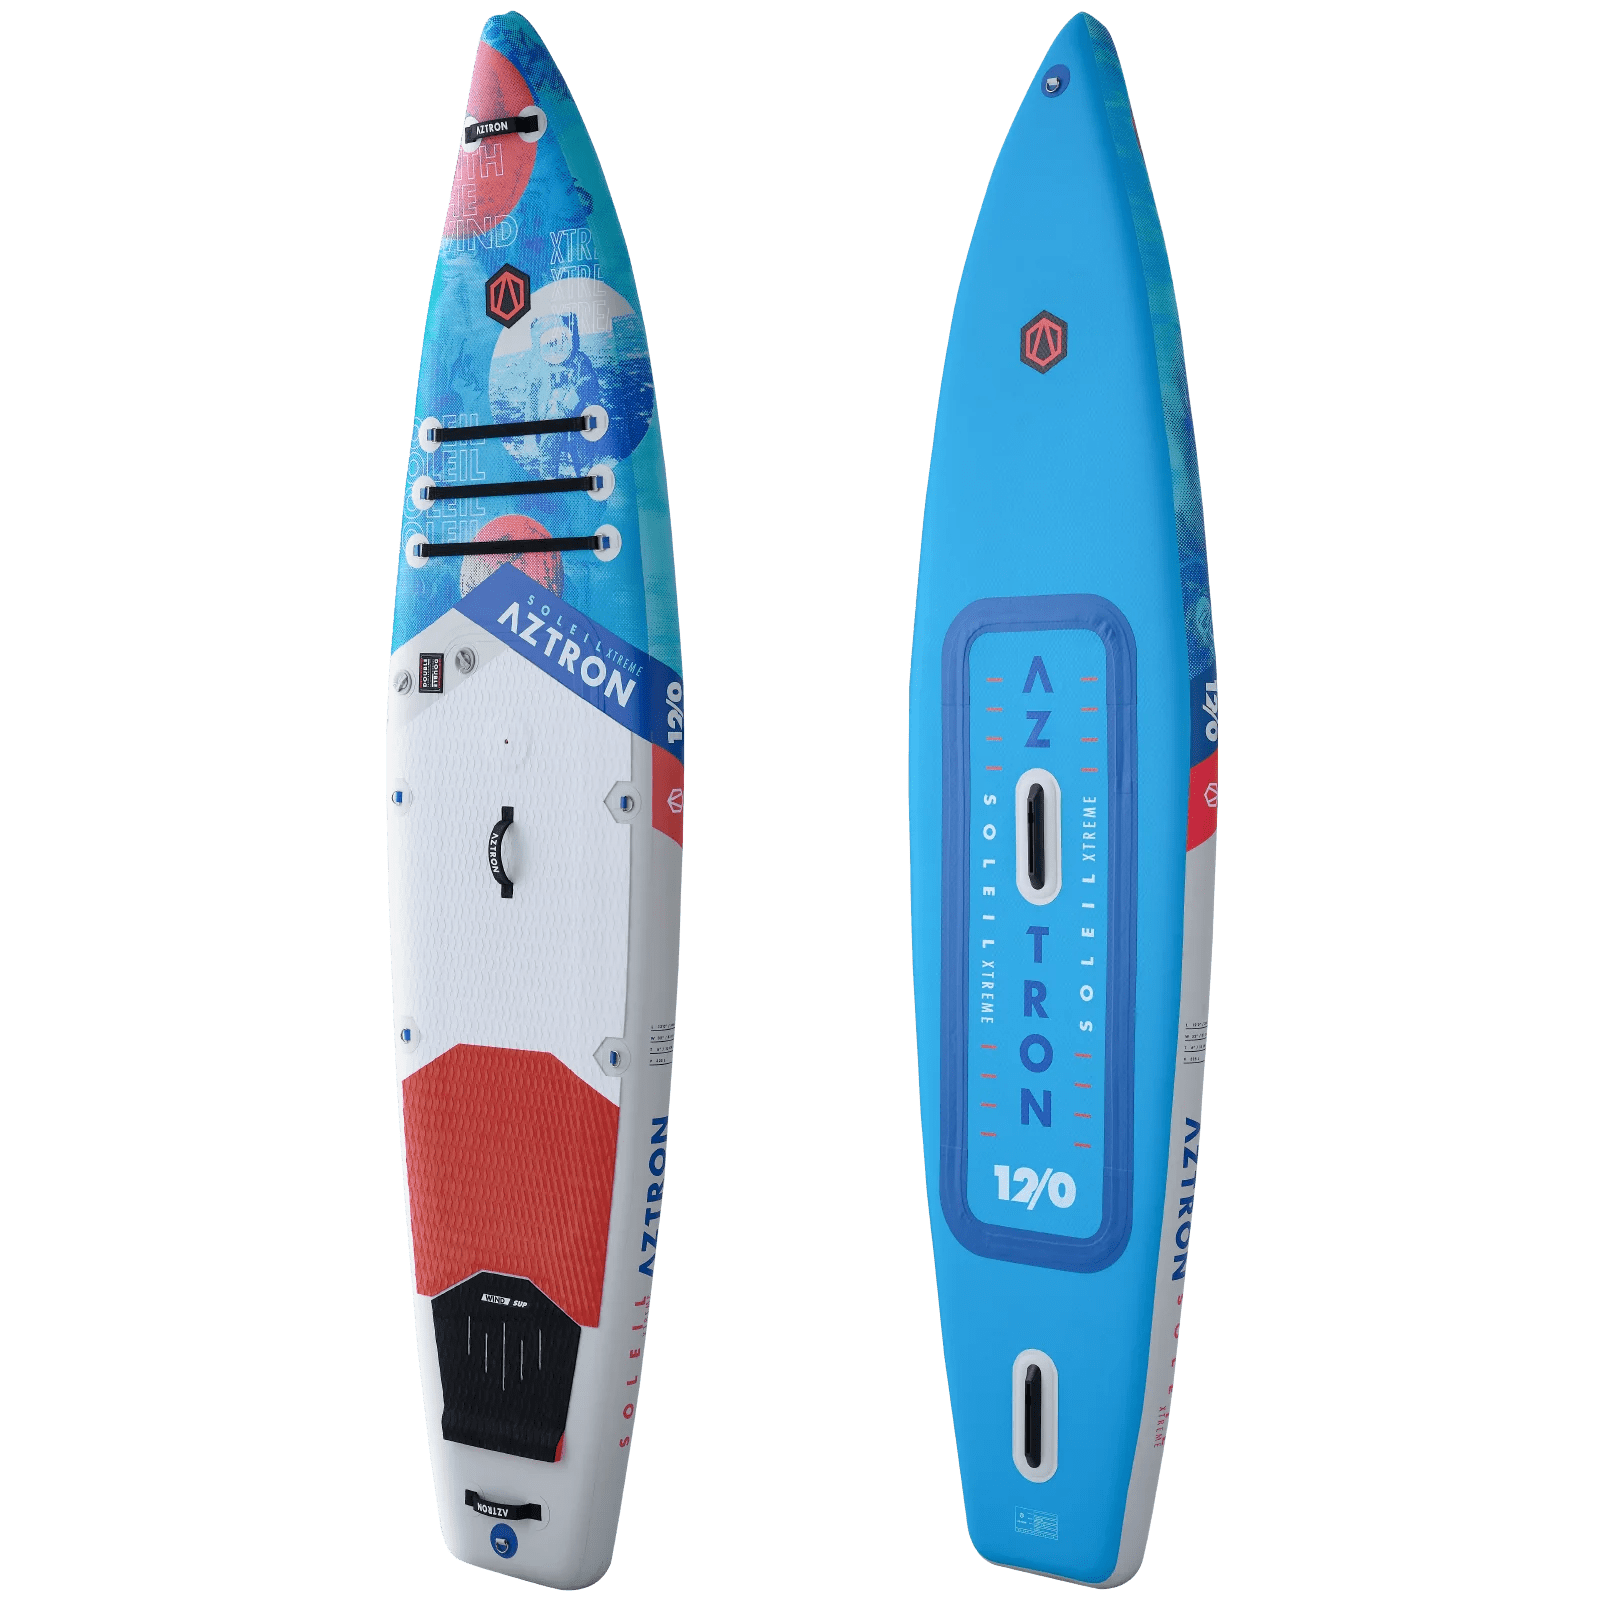 Aztron Soleil Extreme 12'0" 2023 - Worthing Watersports - SUP Inflatables - Aztron